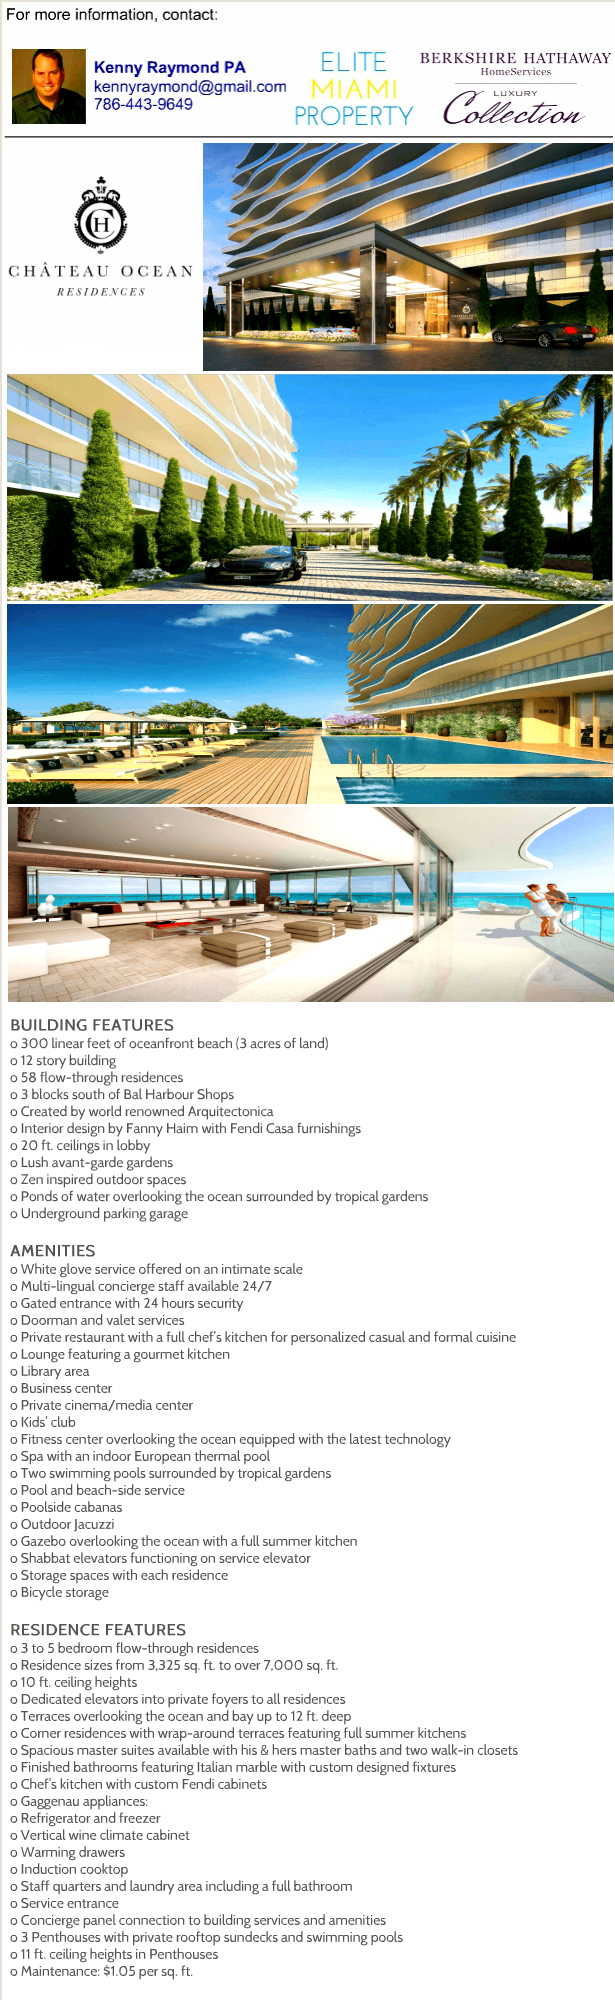 Chateau Ocean Residences Condos for Sale